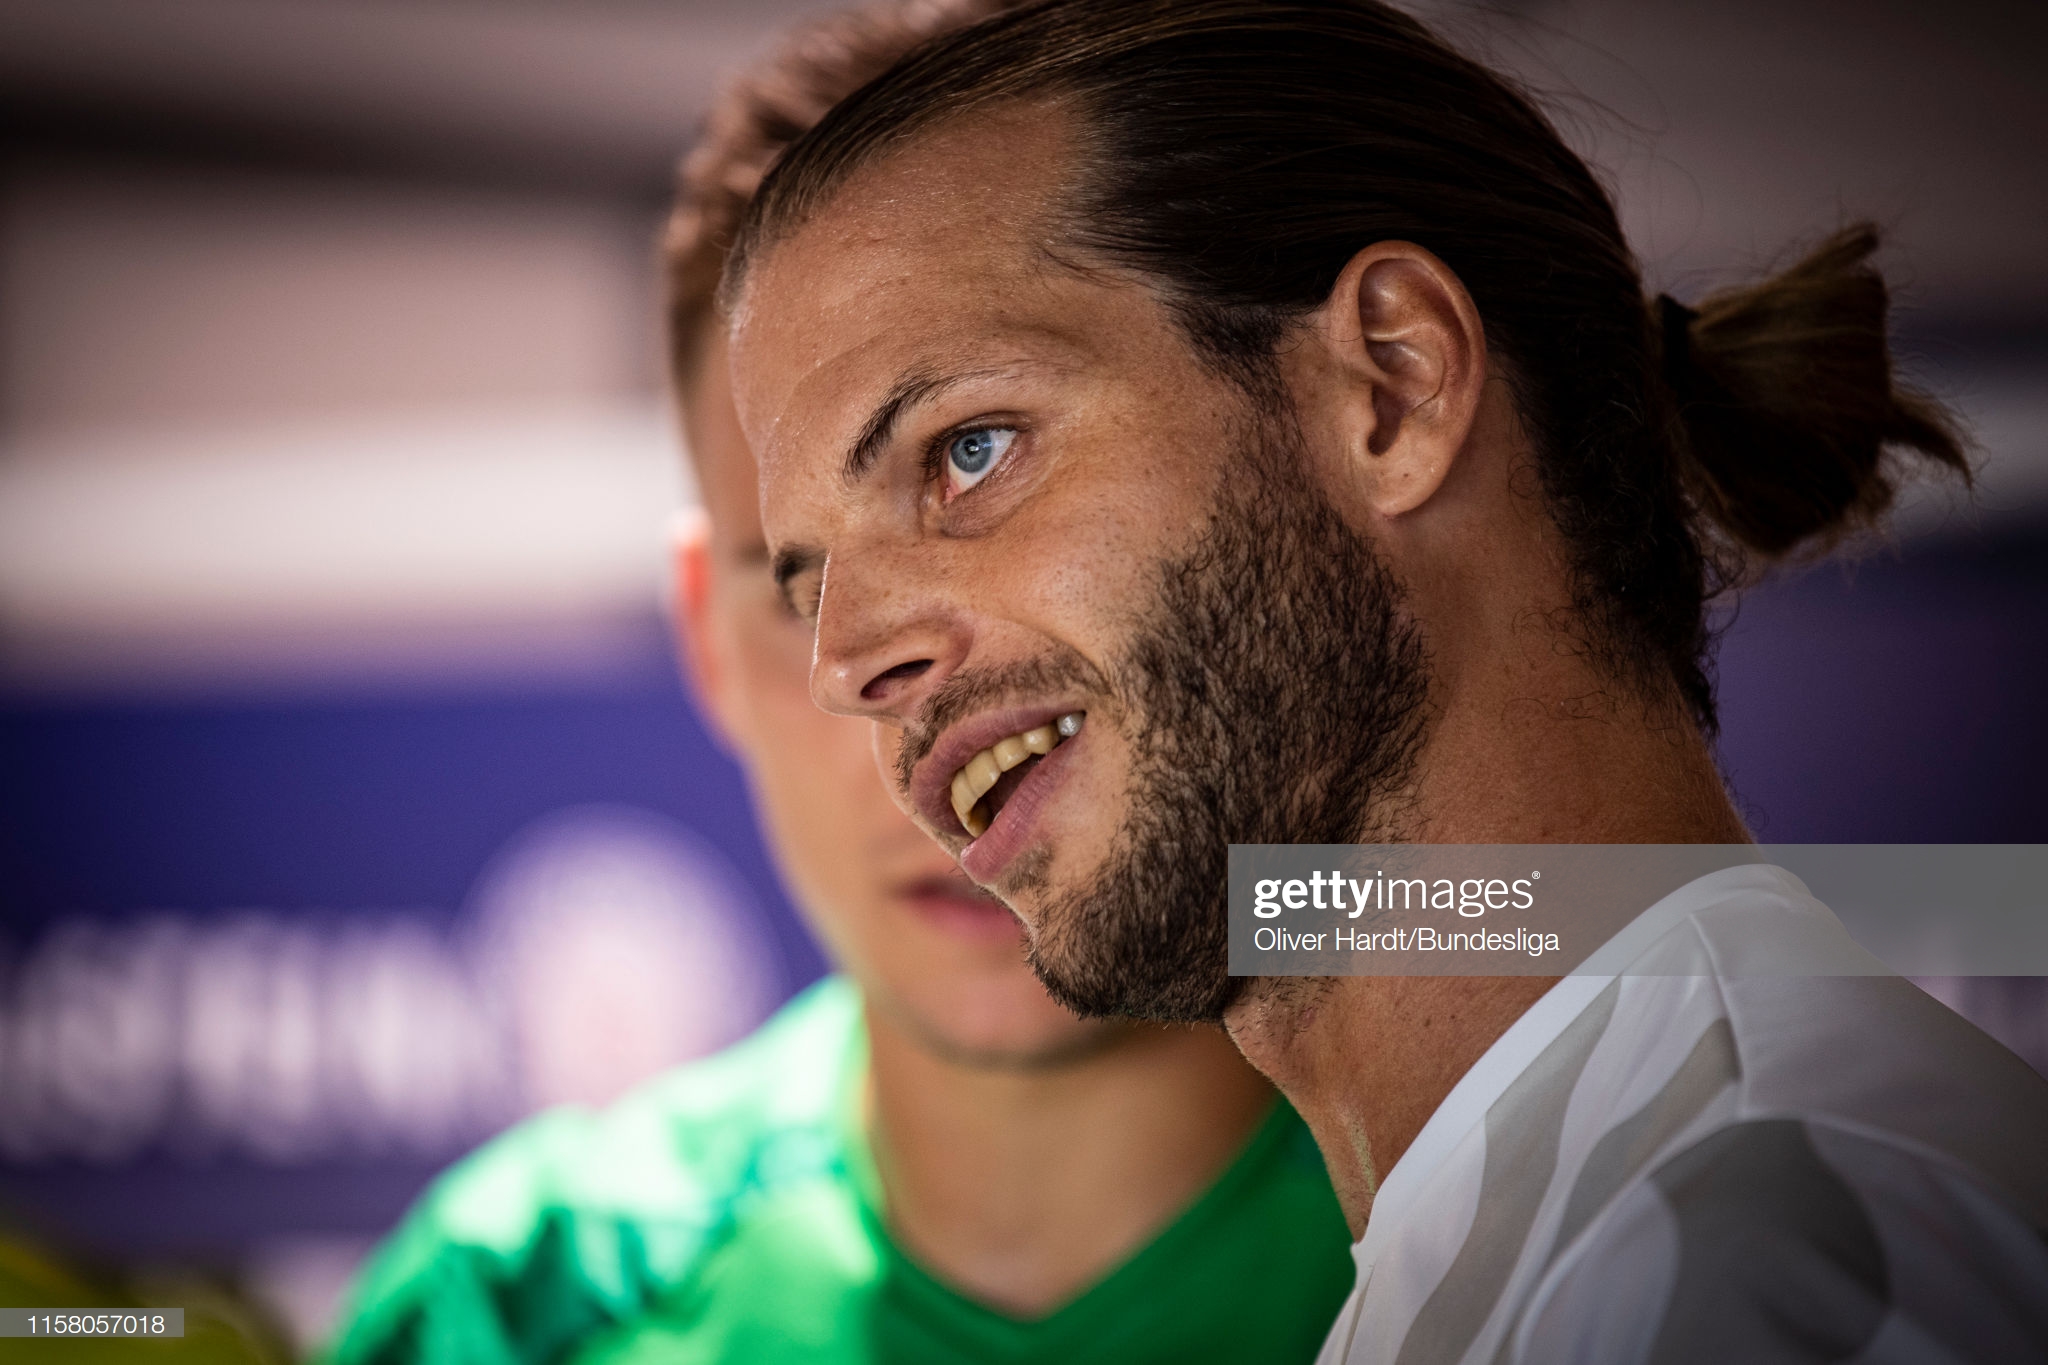 gettyimages-1158057018-2048x2048.jpg